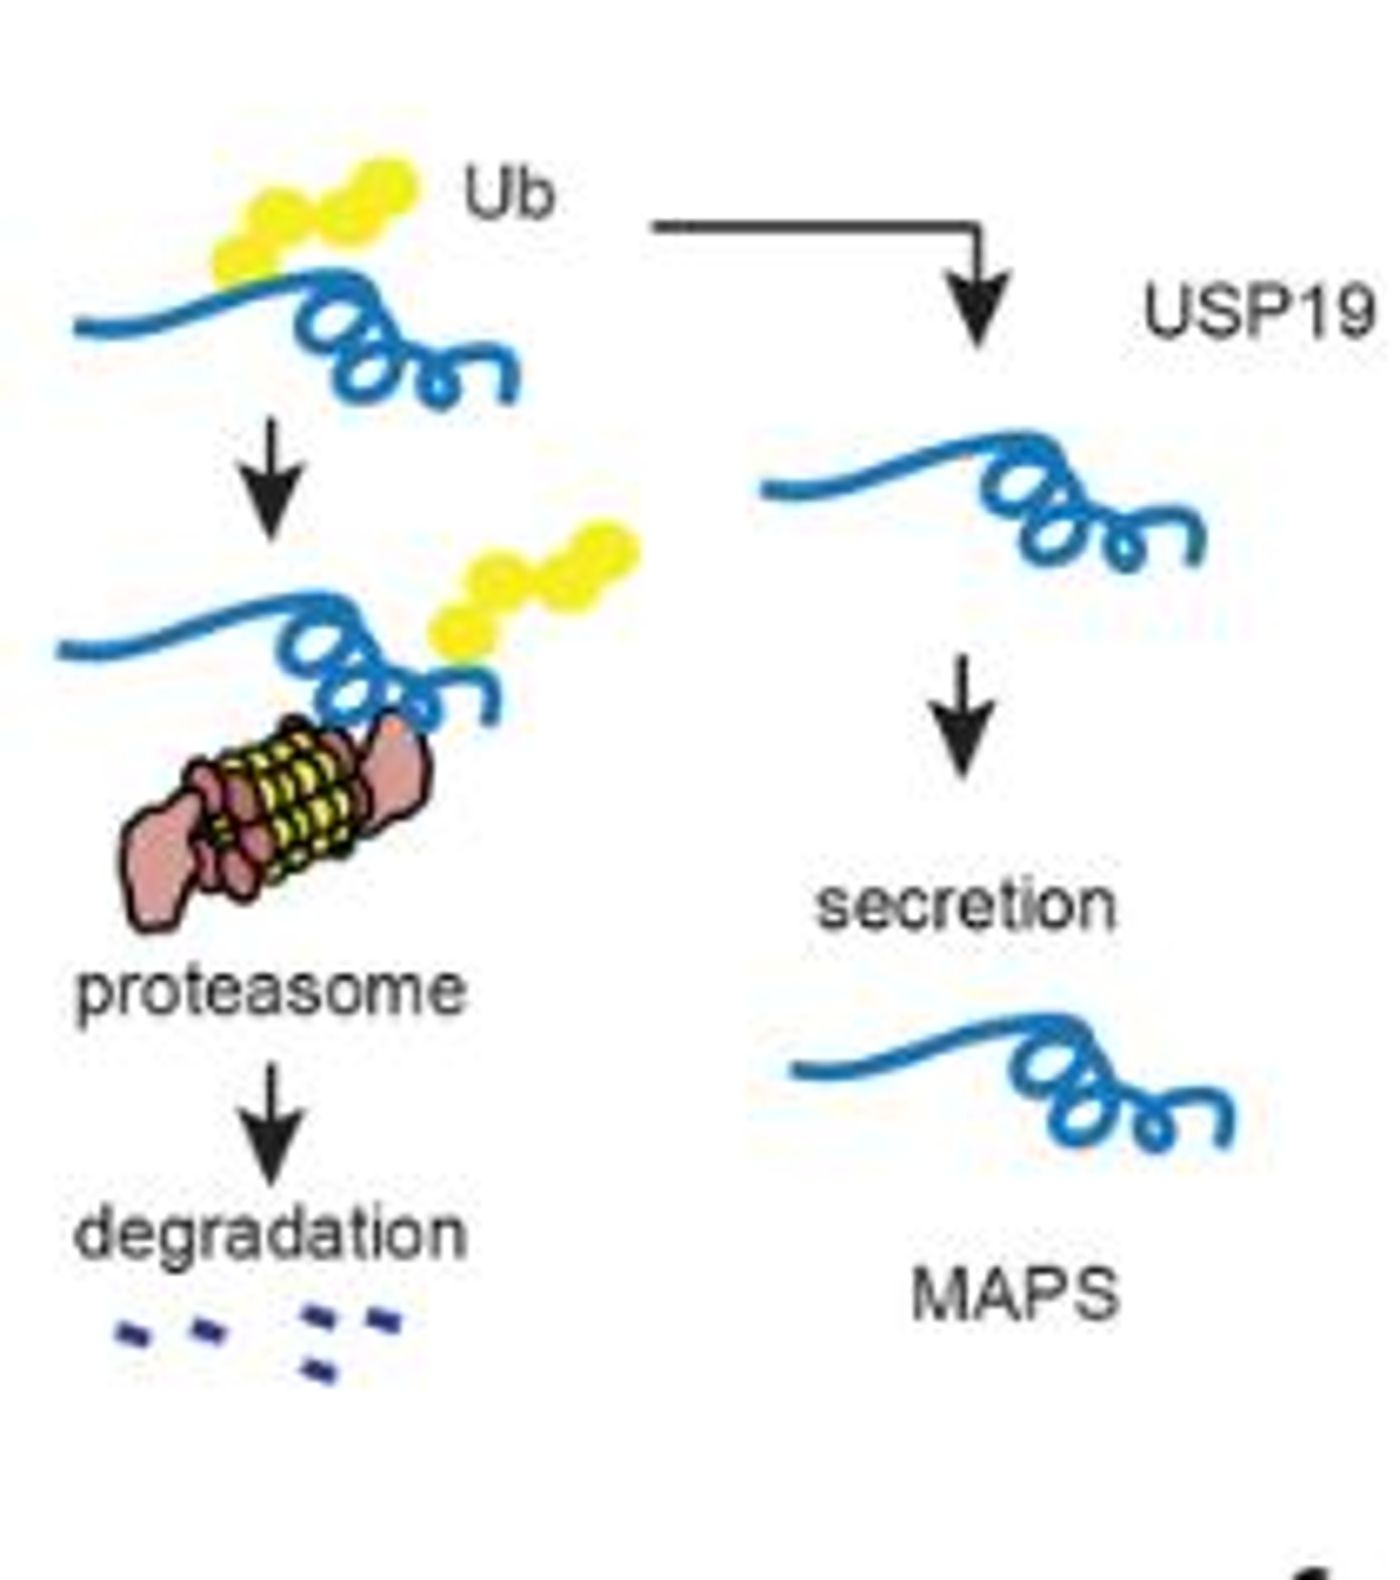 Comparison of the Ub-proteasome system and the MAPS pathway.